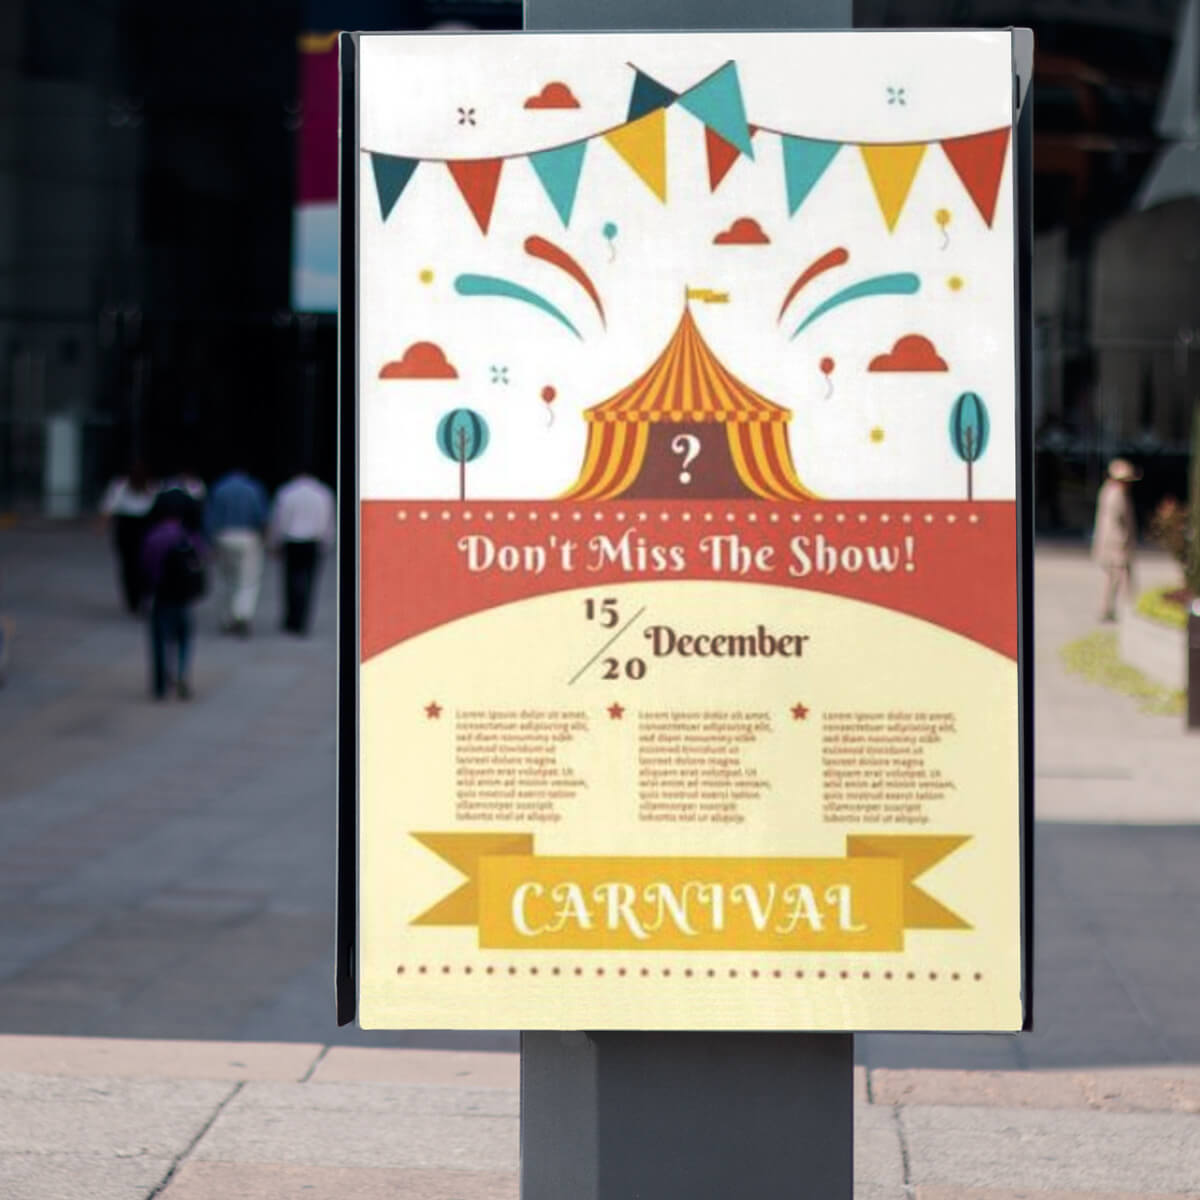 Outdoor carnival pvc signs and banners by Curative Printing